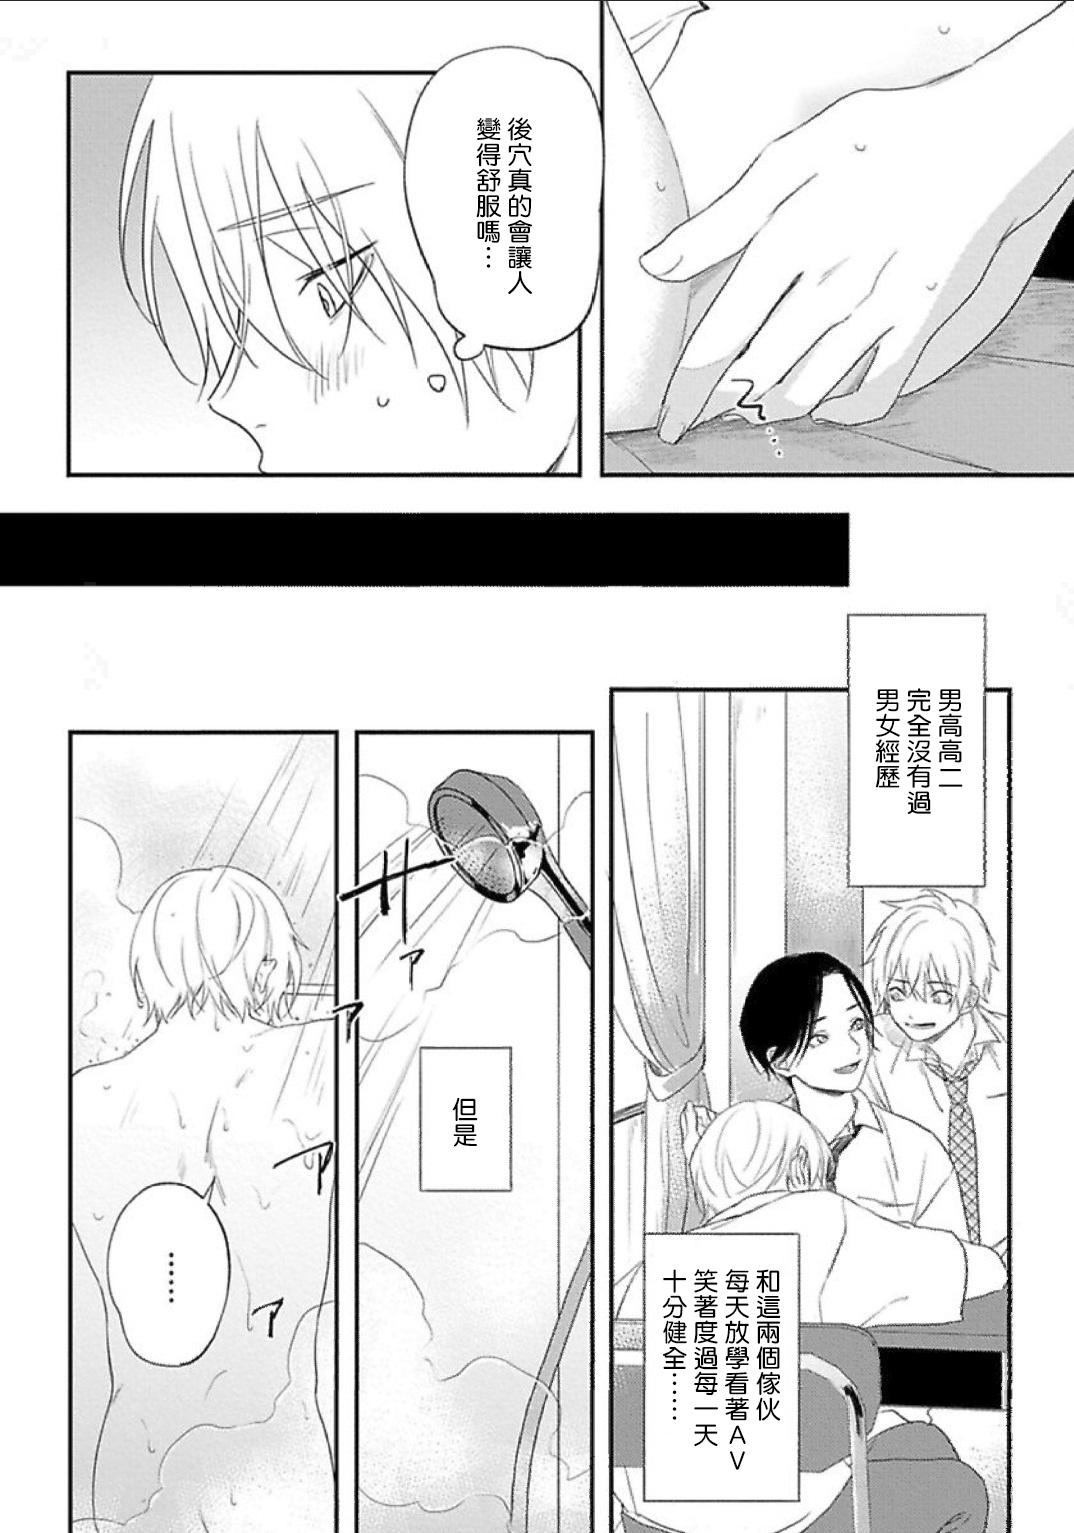 Pussylicking Houkago Virginity - Virginity afterschool 1 Egypt - Page 6